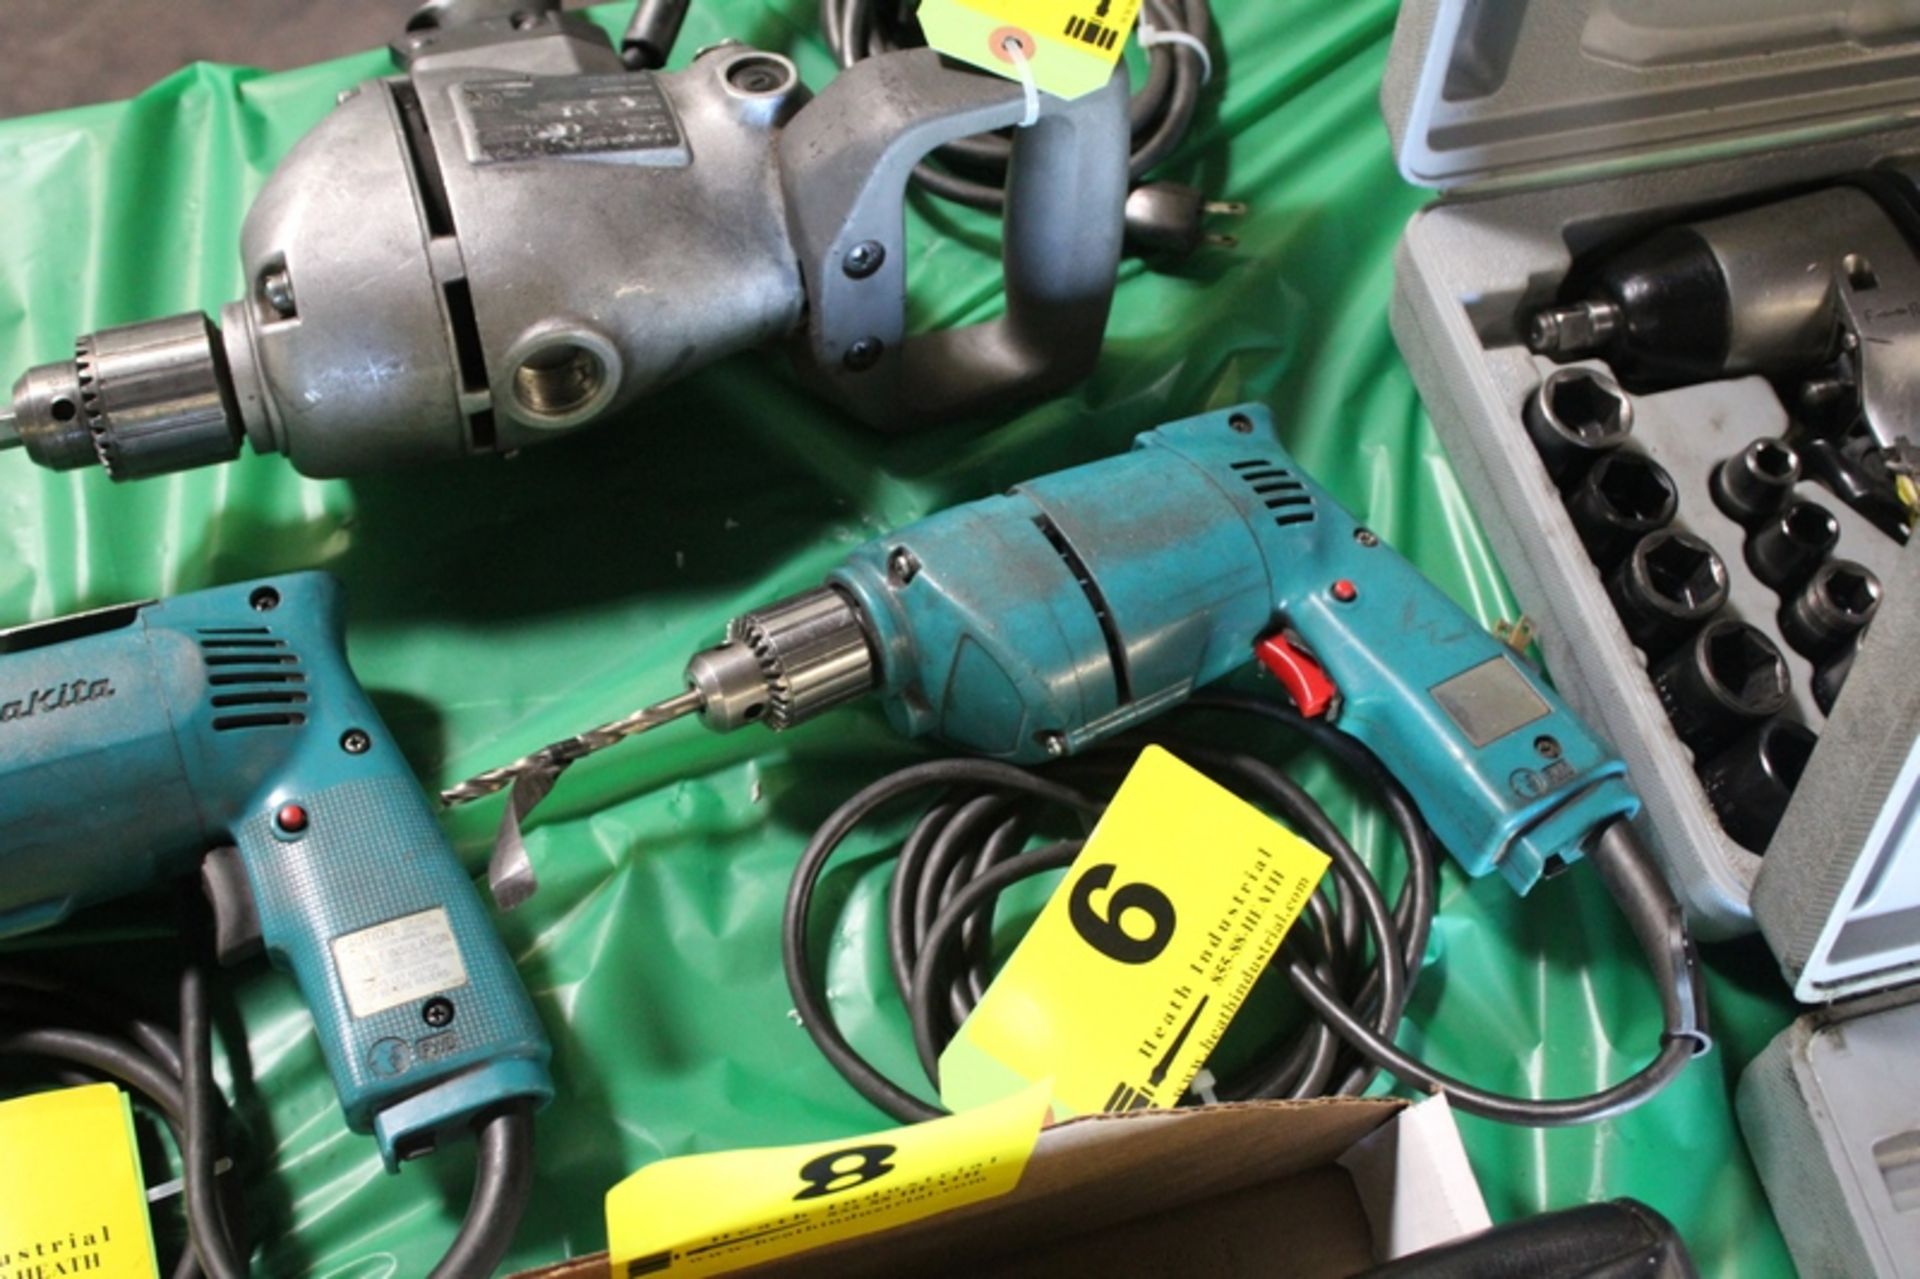 3/8" ELECTRIC DRILL